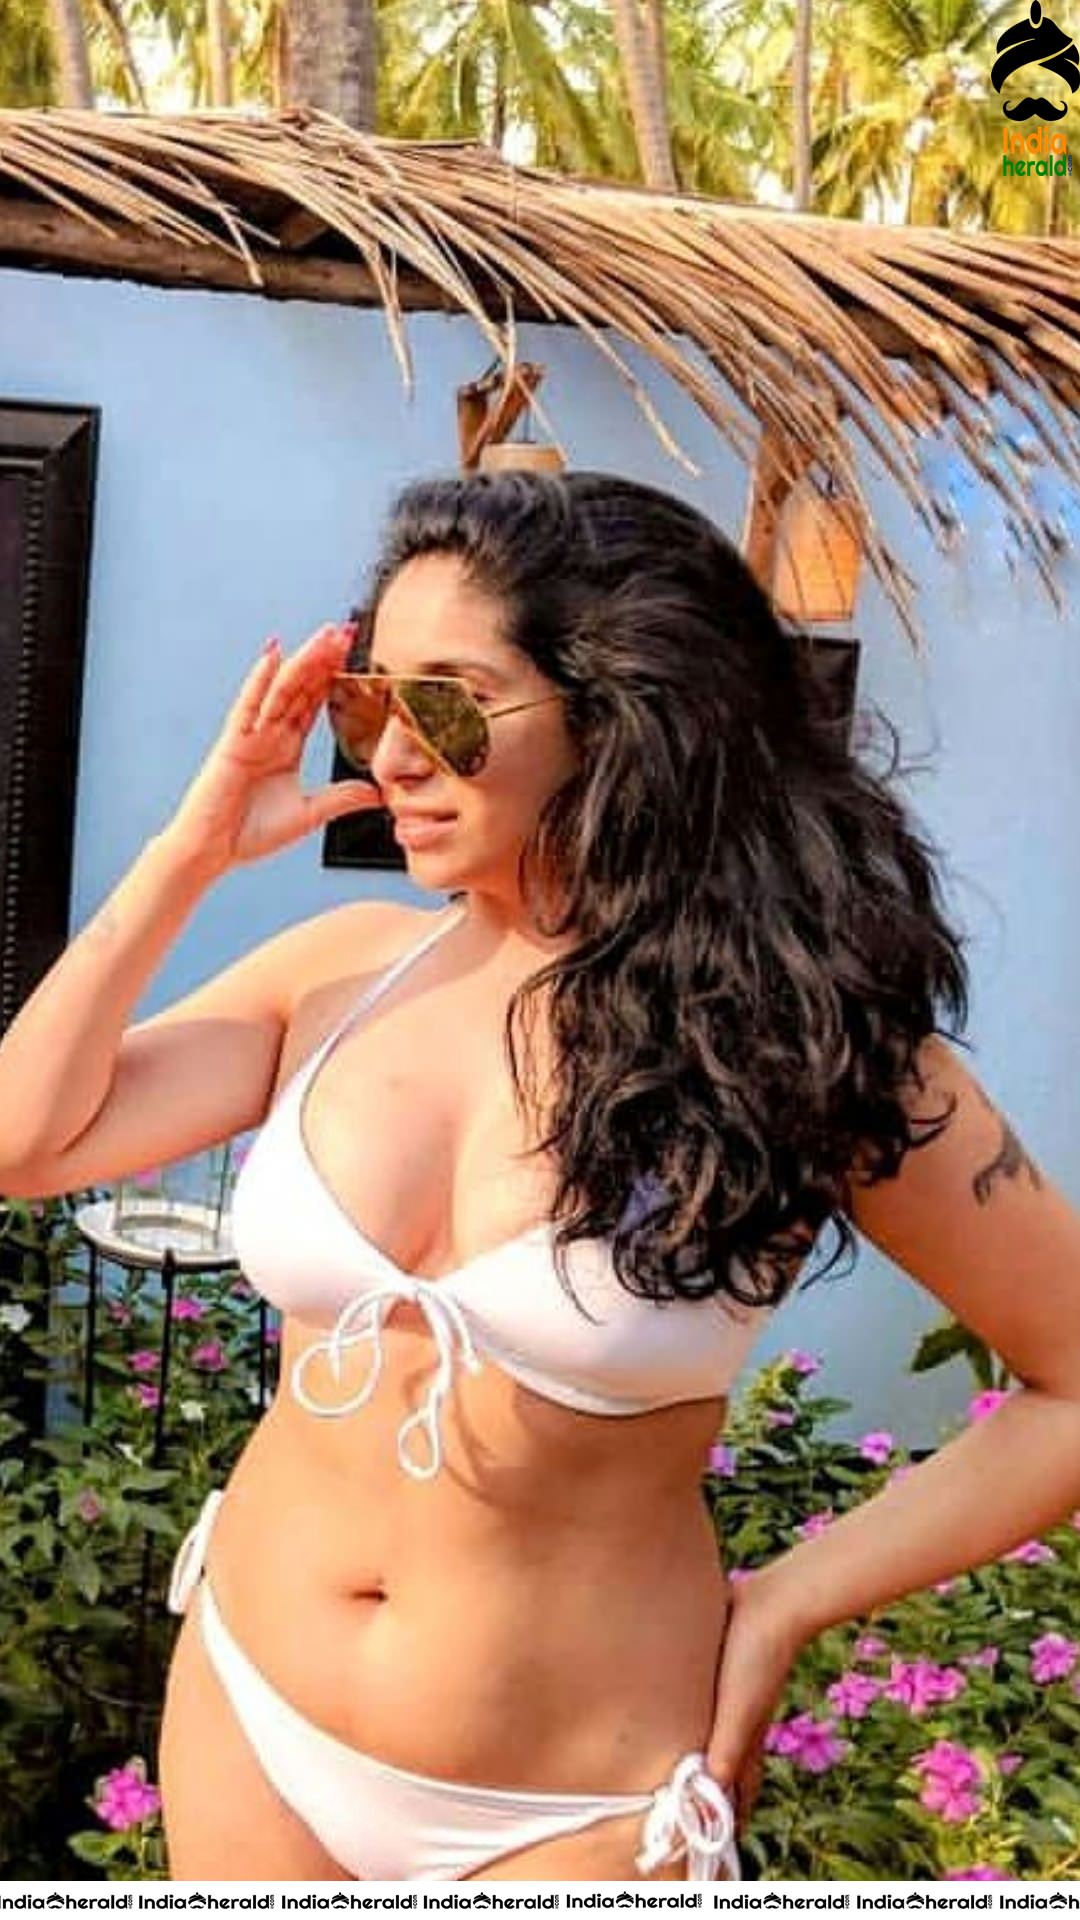 Singer Neha Bhasin Hot Photos Collection to tempt your mood Set 2